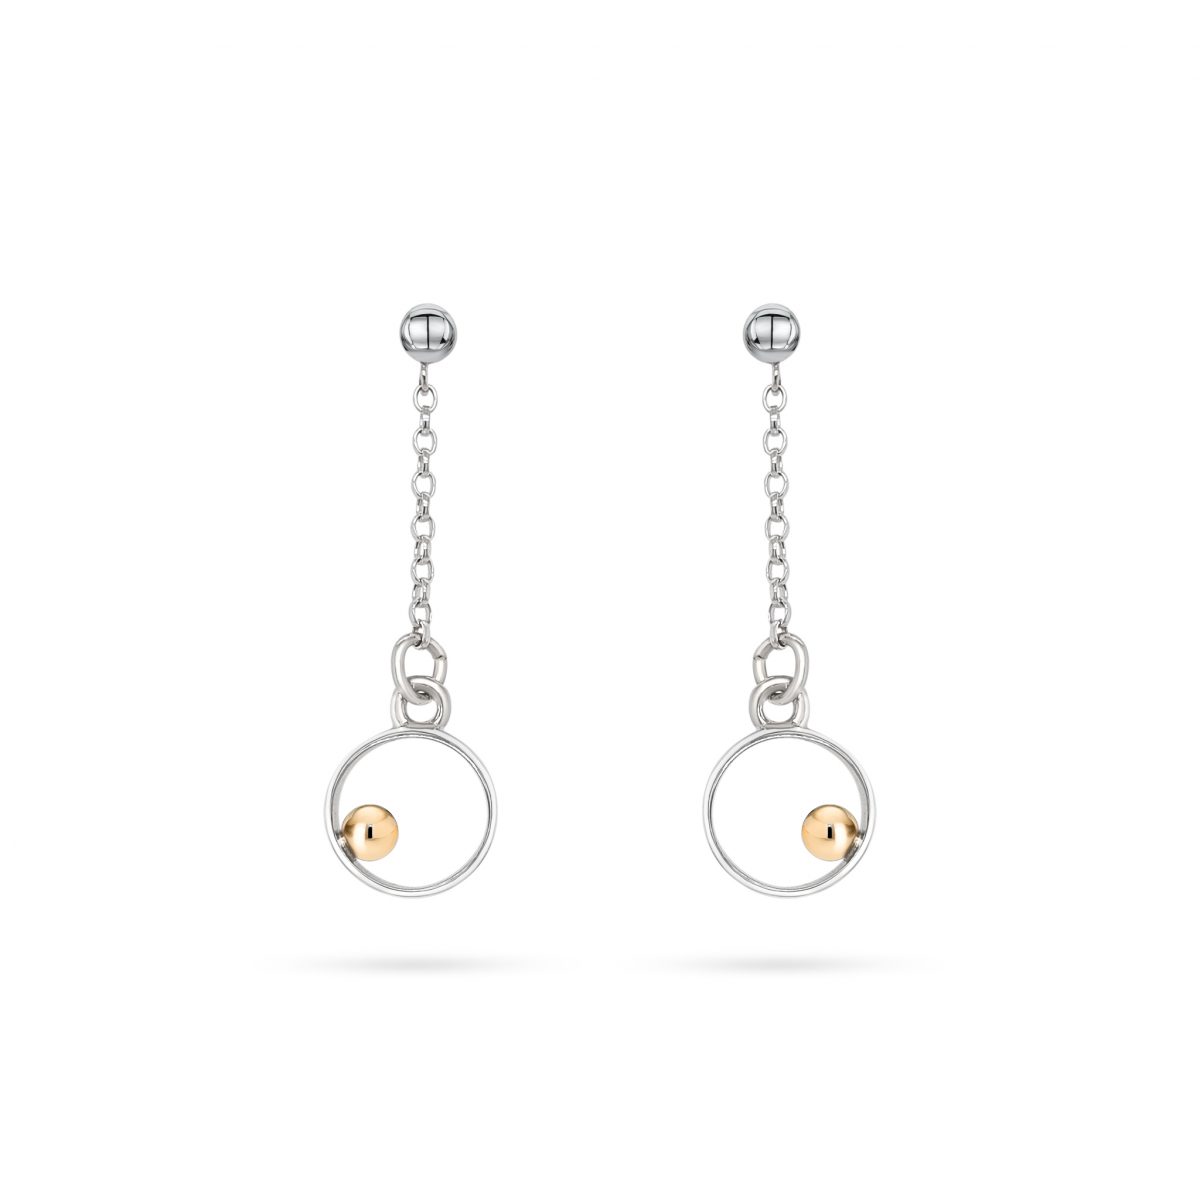 Cathal Barber Goldsmith Circle Drop Earrings in Silver and Gold